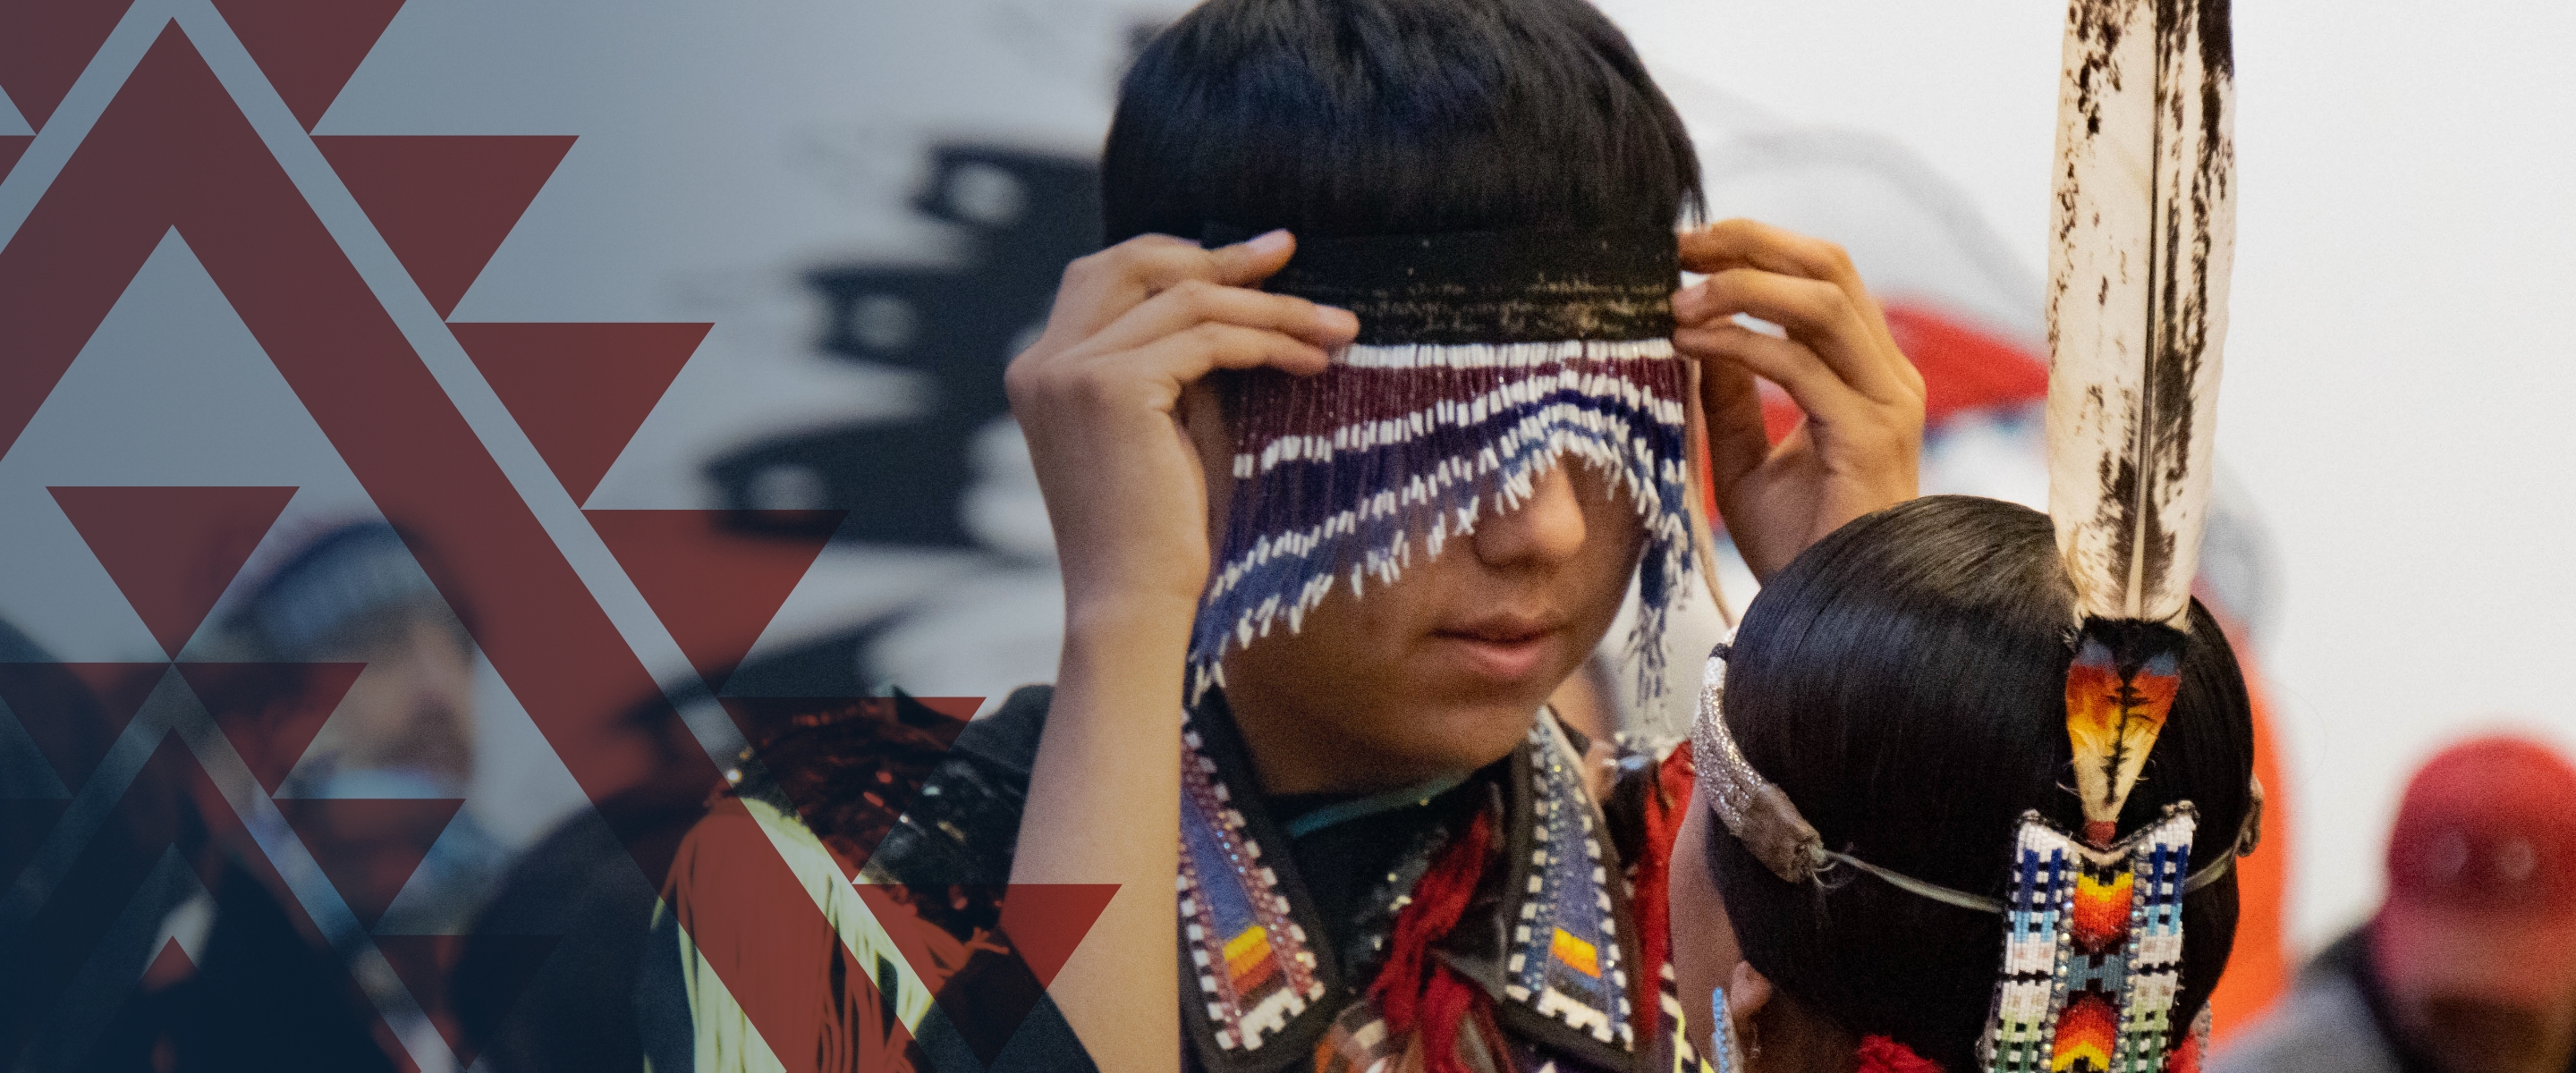 Native American youth adjusting his headdress at a Pow Wow